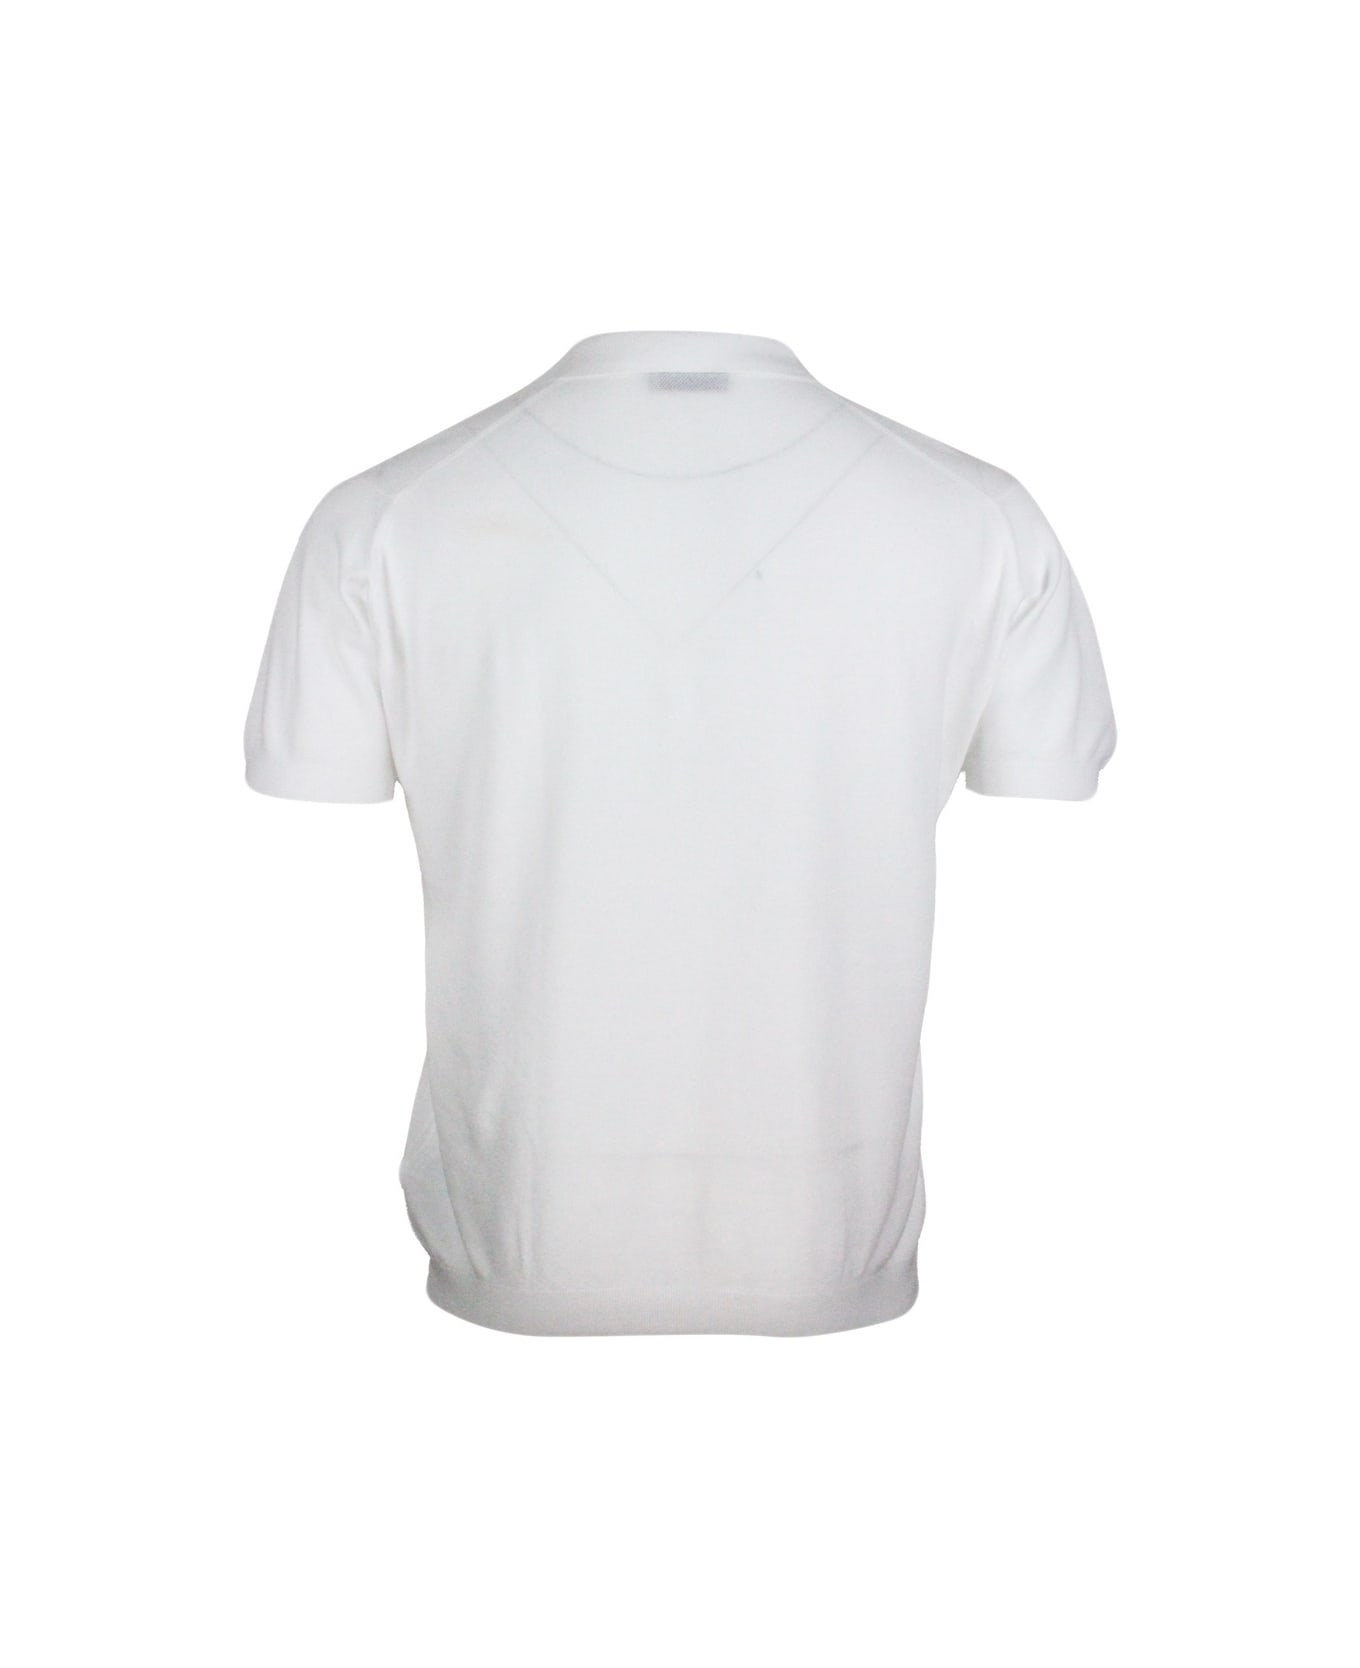 John Smedley Short-sleeved Polo Shirt In Extrafine Piqué Cotton Thread With Three Buttons - White